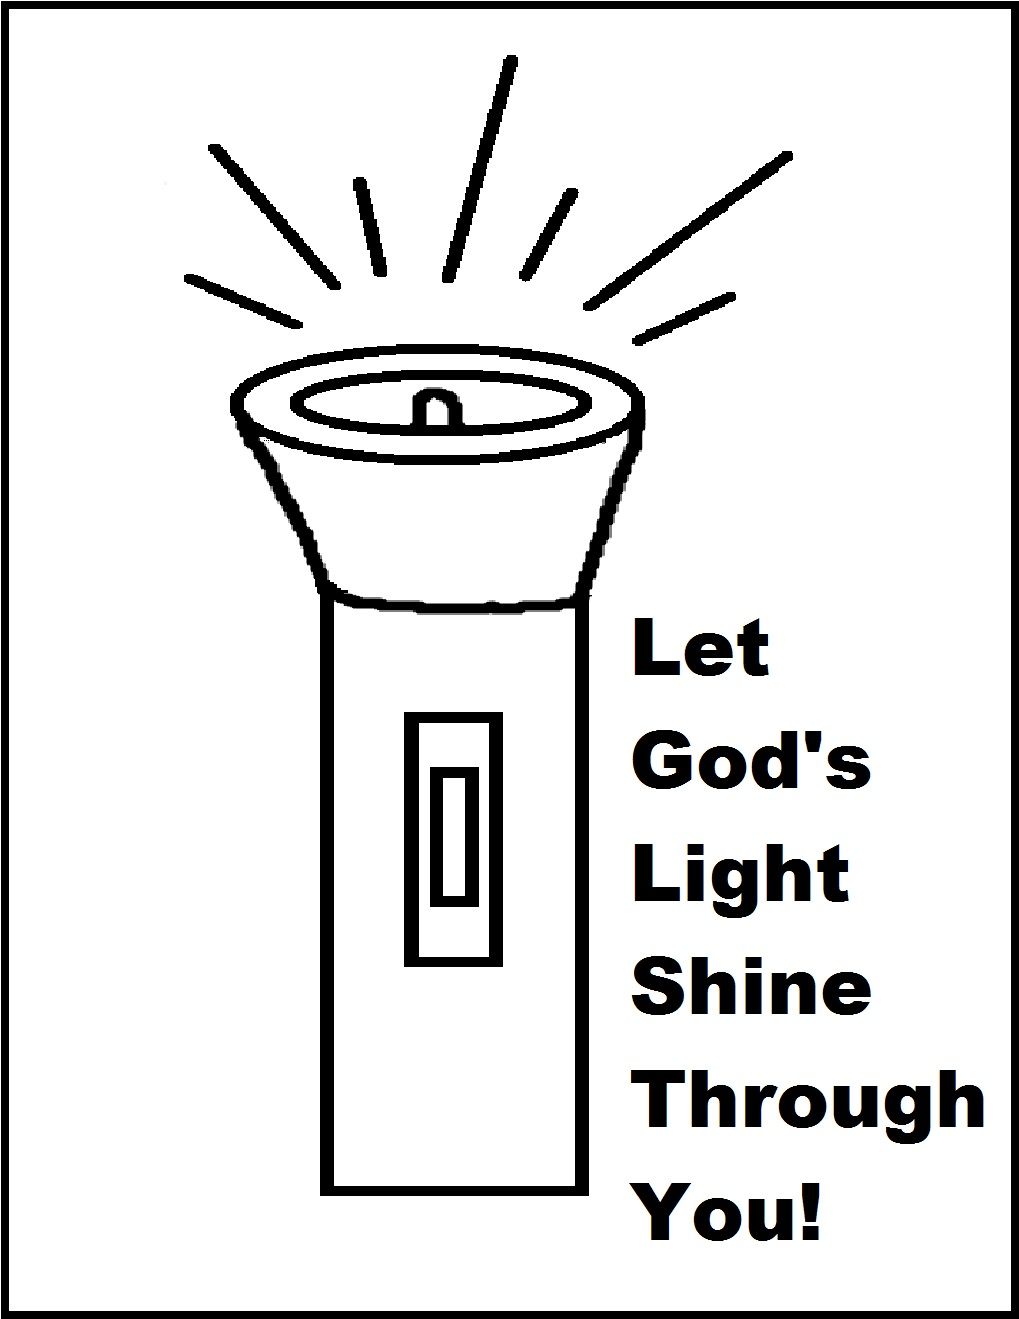 Let Your Light Shine Coloring Page | Preschool bible lessons, Let your light  shine, Childrens church lessons